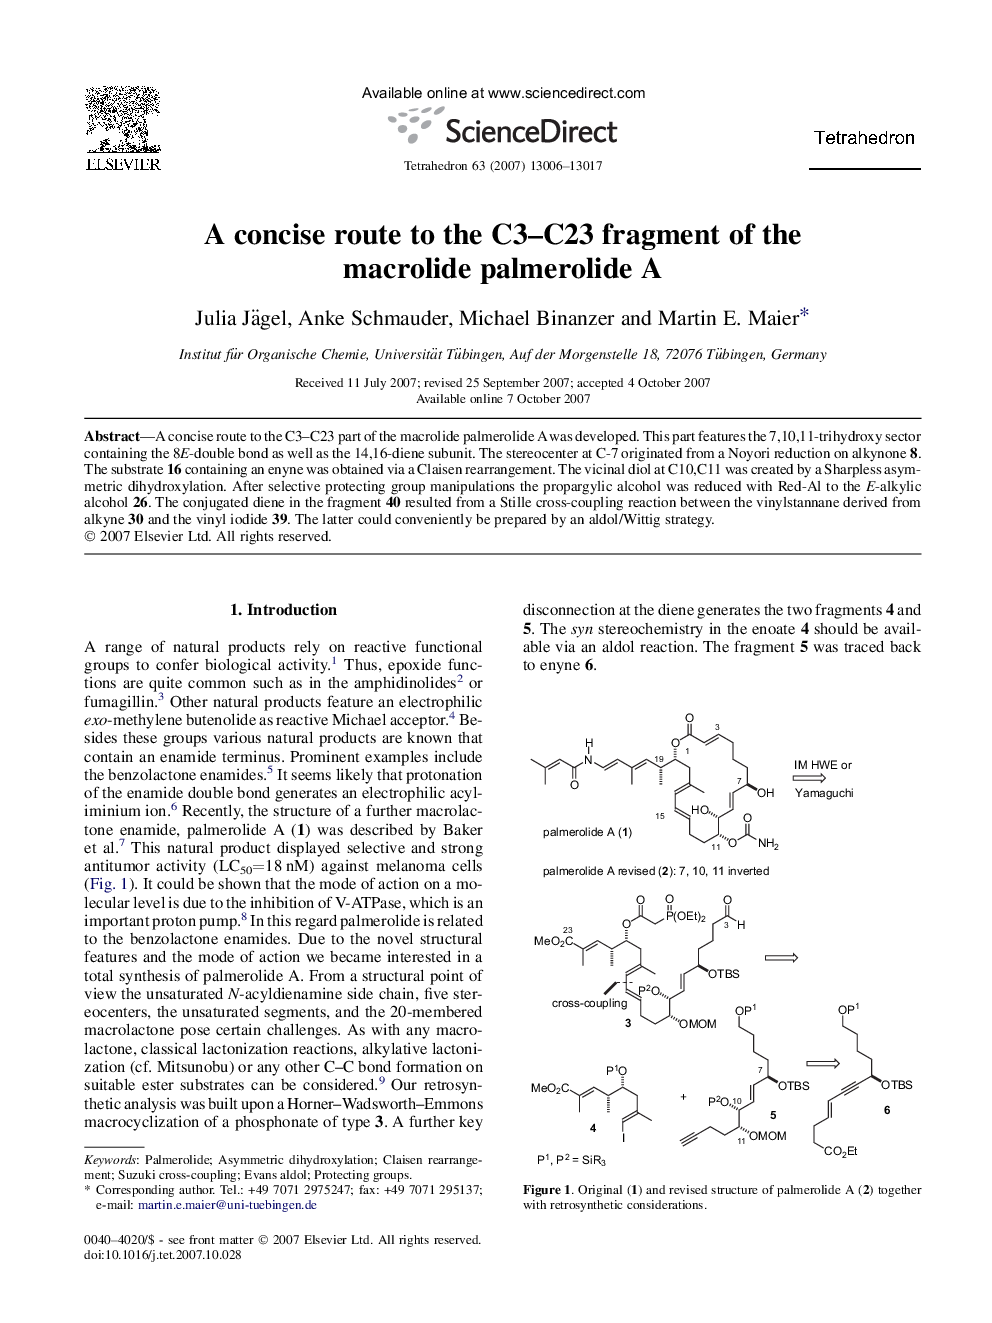 A concise route to the C3-C23 fragment of the macrolide palmerolide A